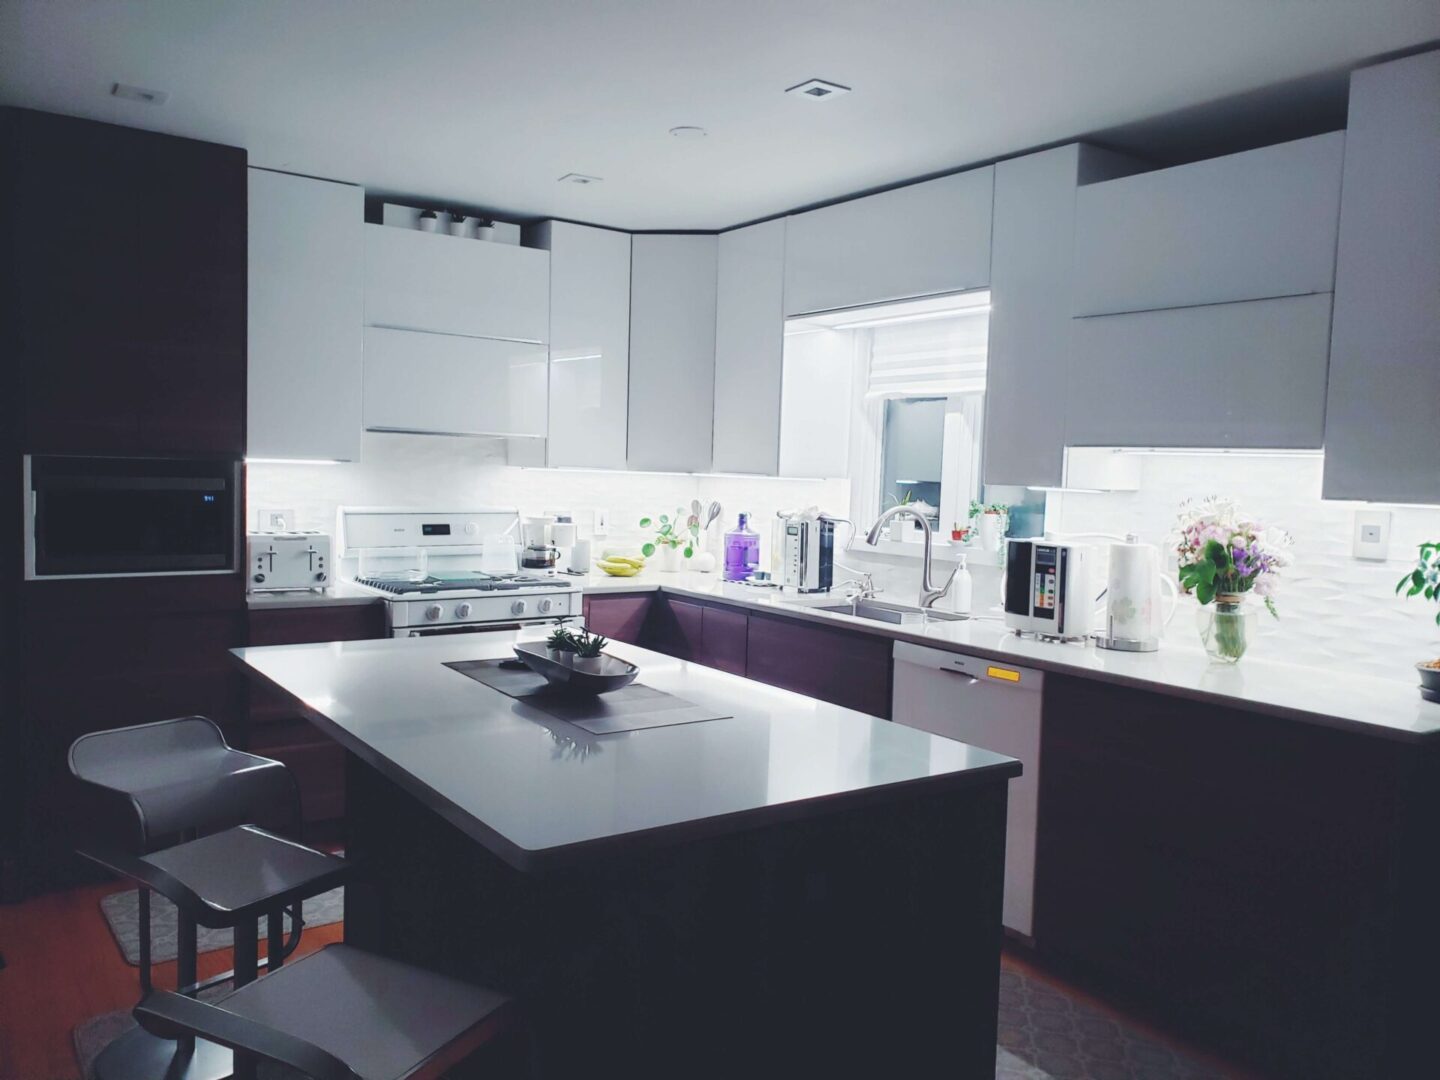 Minimalist kitchen interior with built-in electronics